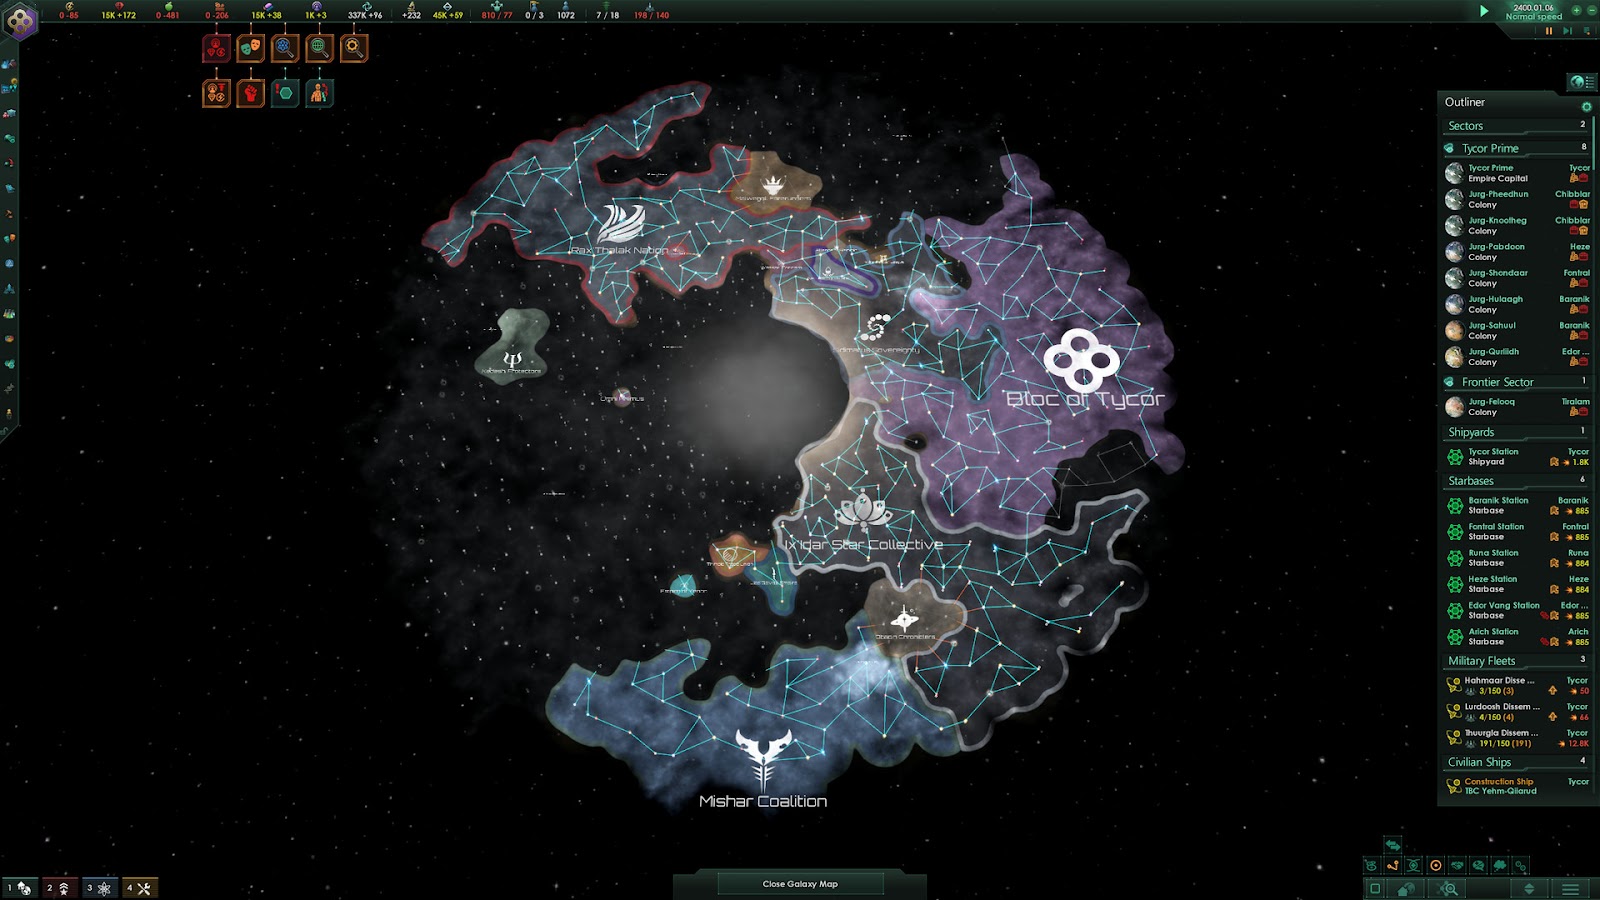 Screenshot of Stellaris 2 showing the regions map and the factions